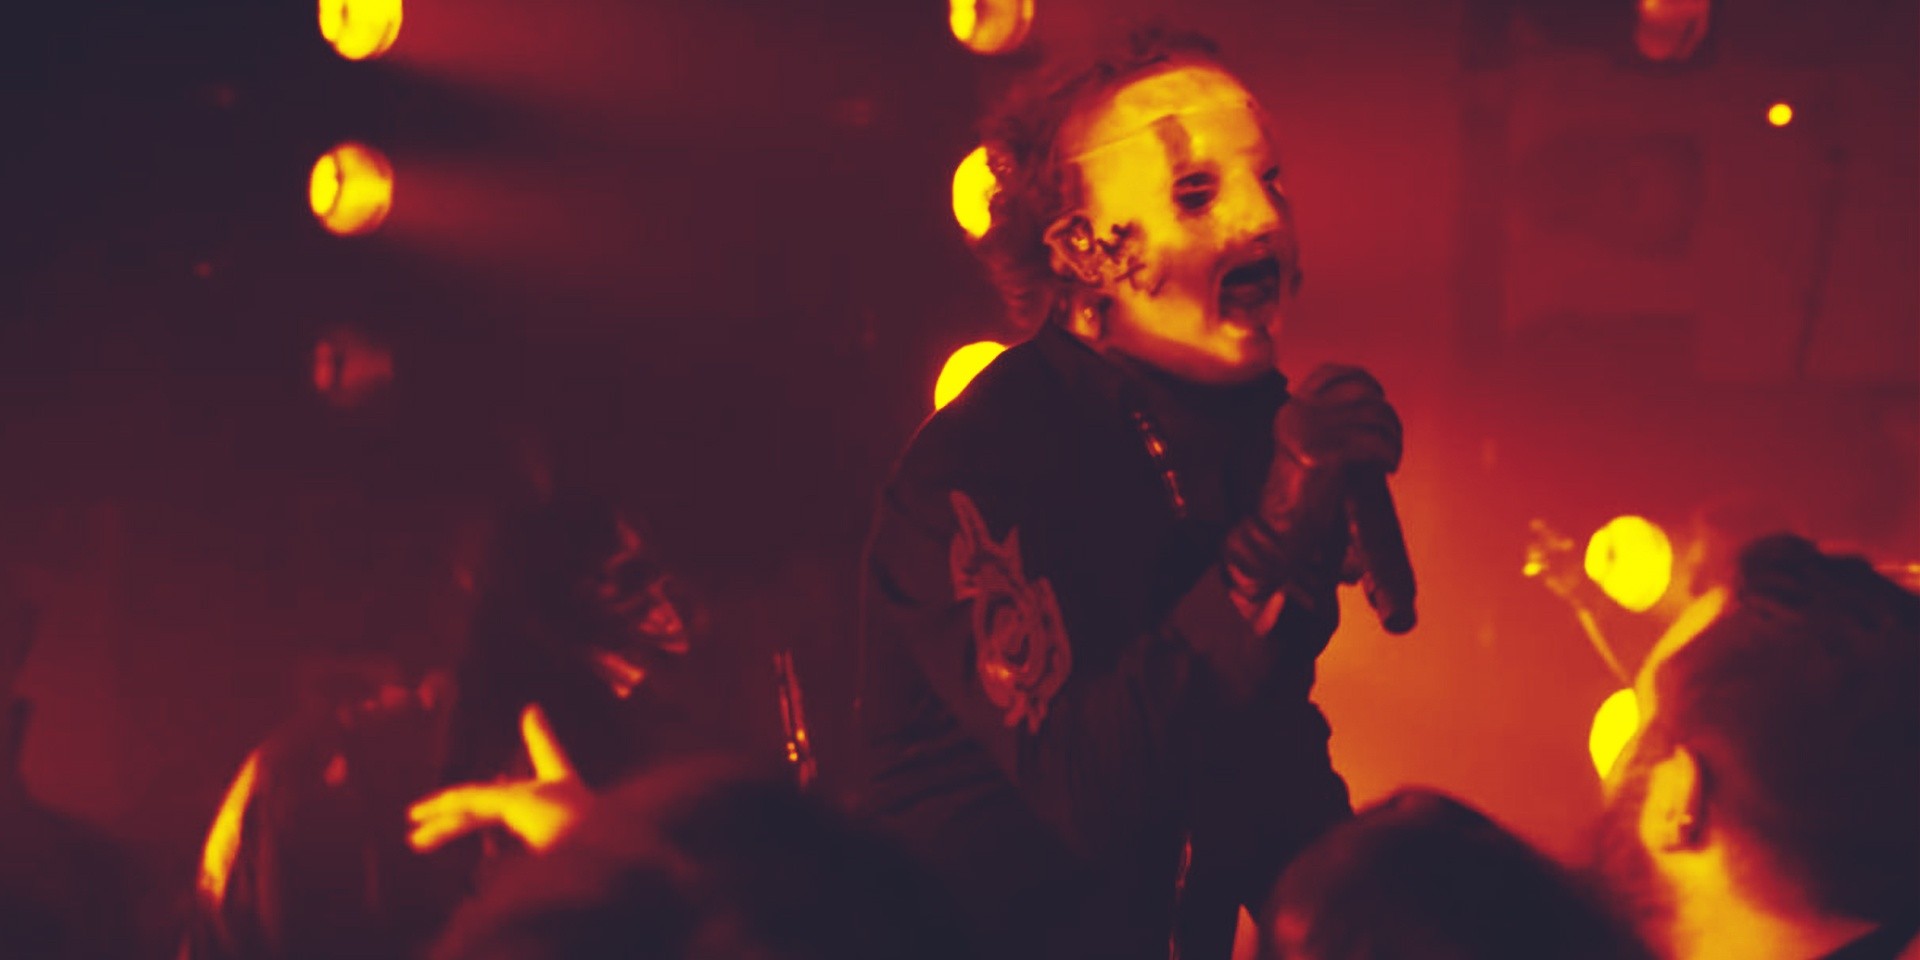 Now you can pretend you're at a Slipknot concert while stuck in lockdown – watch